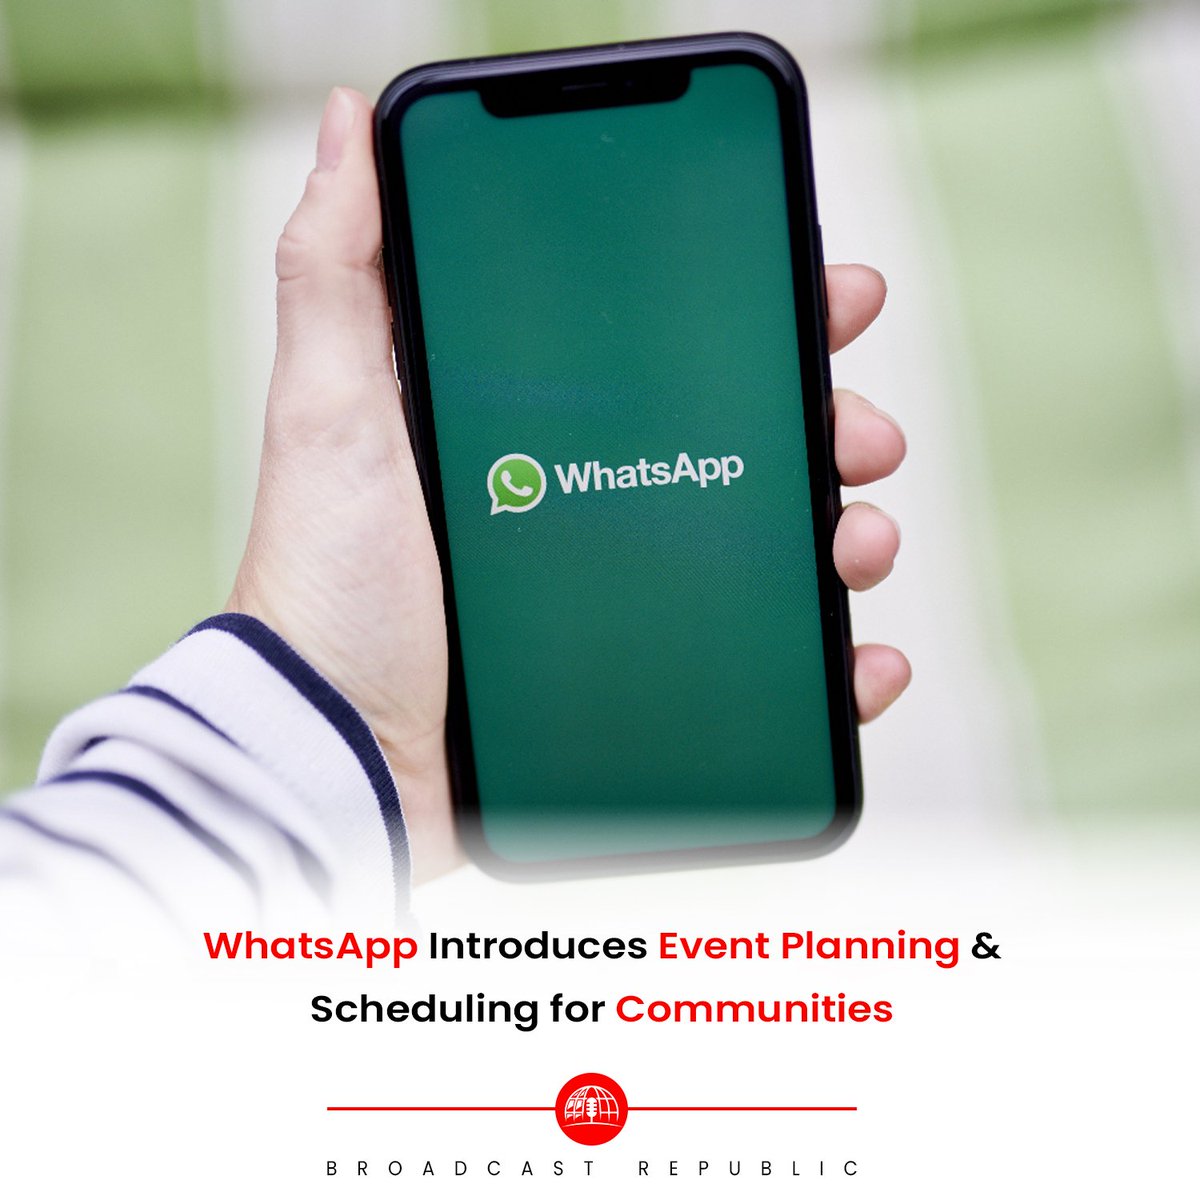 WhatsApp now lets users plan and schedule events in Communities.